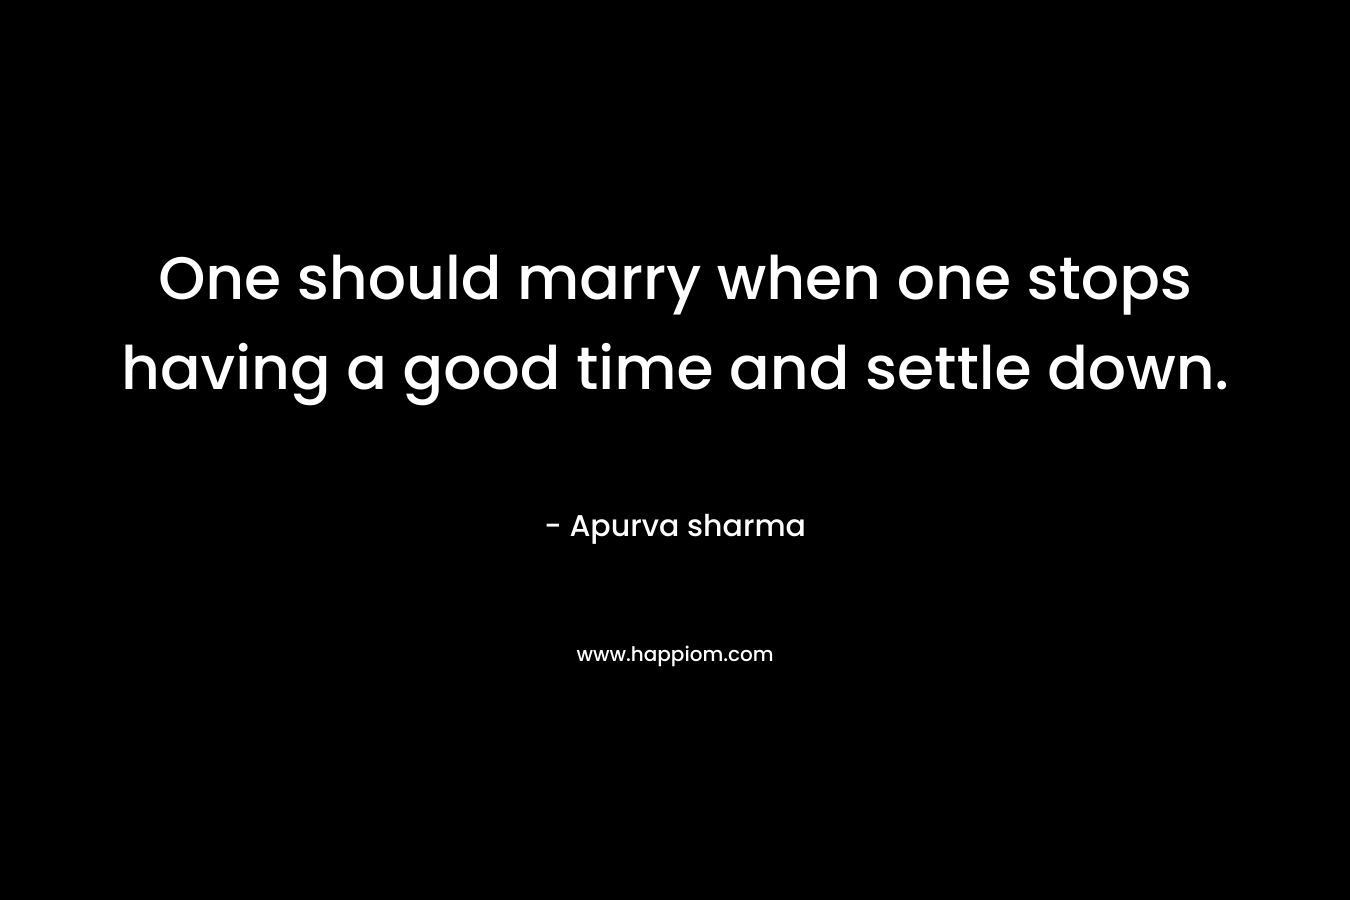 One should marry when one stops having a good time and settle down.